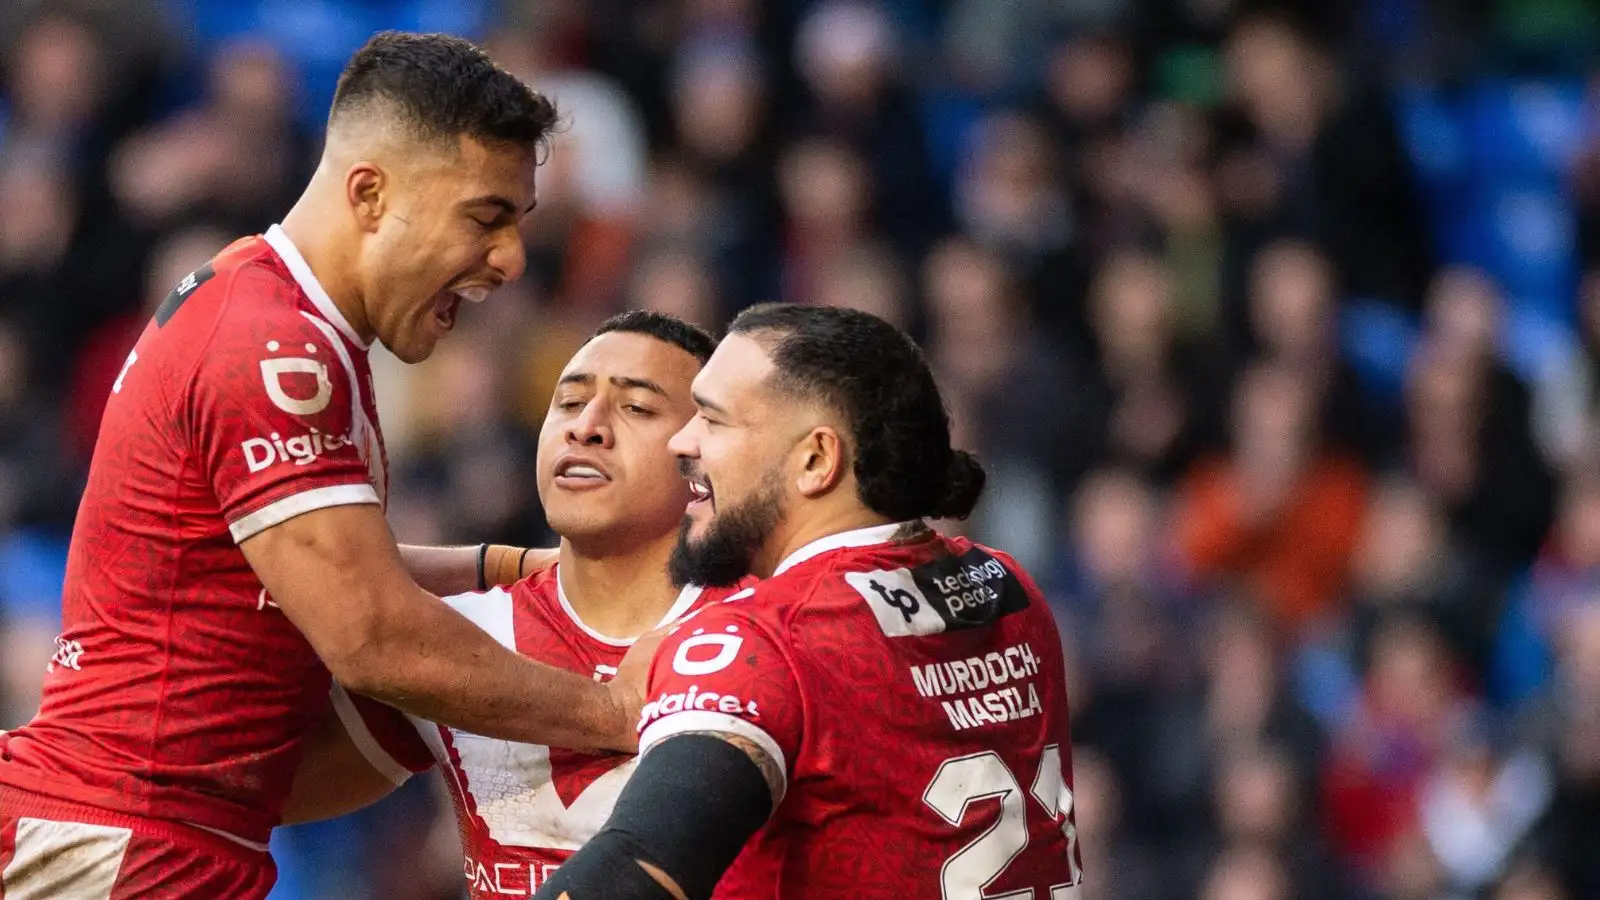 Catalans Dragons set to lose another big name player; Tonga international lined up on huge deal